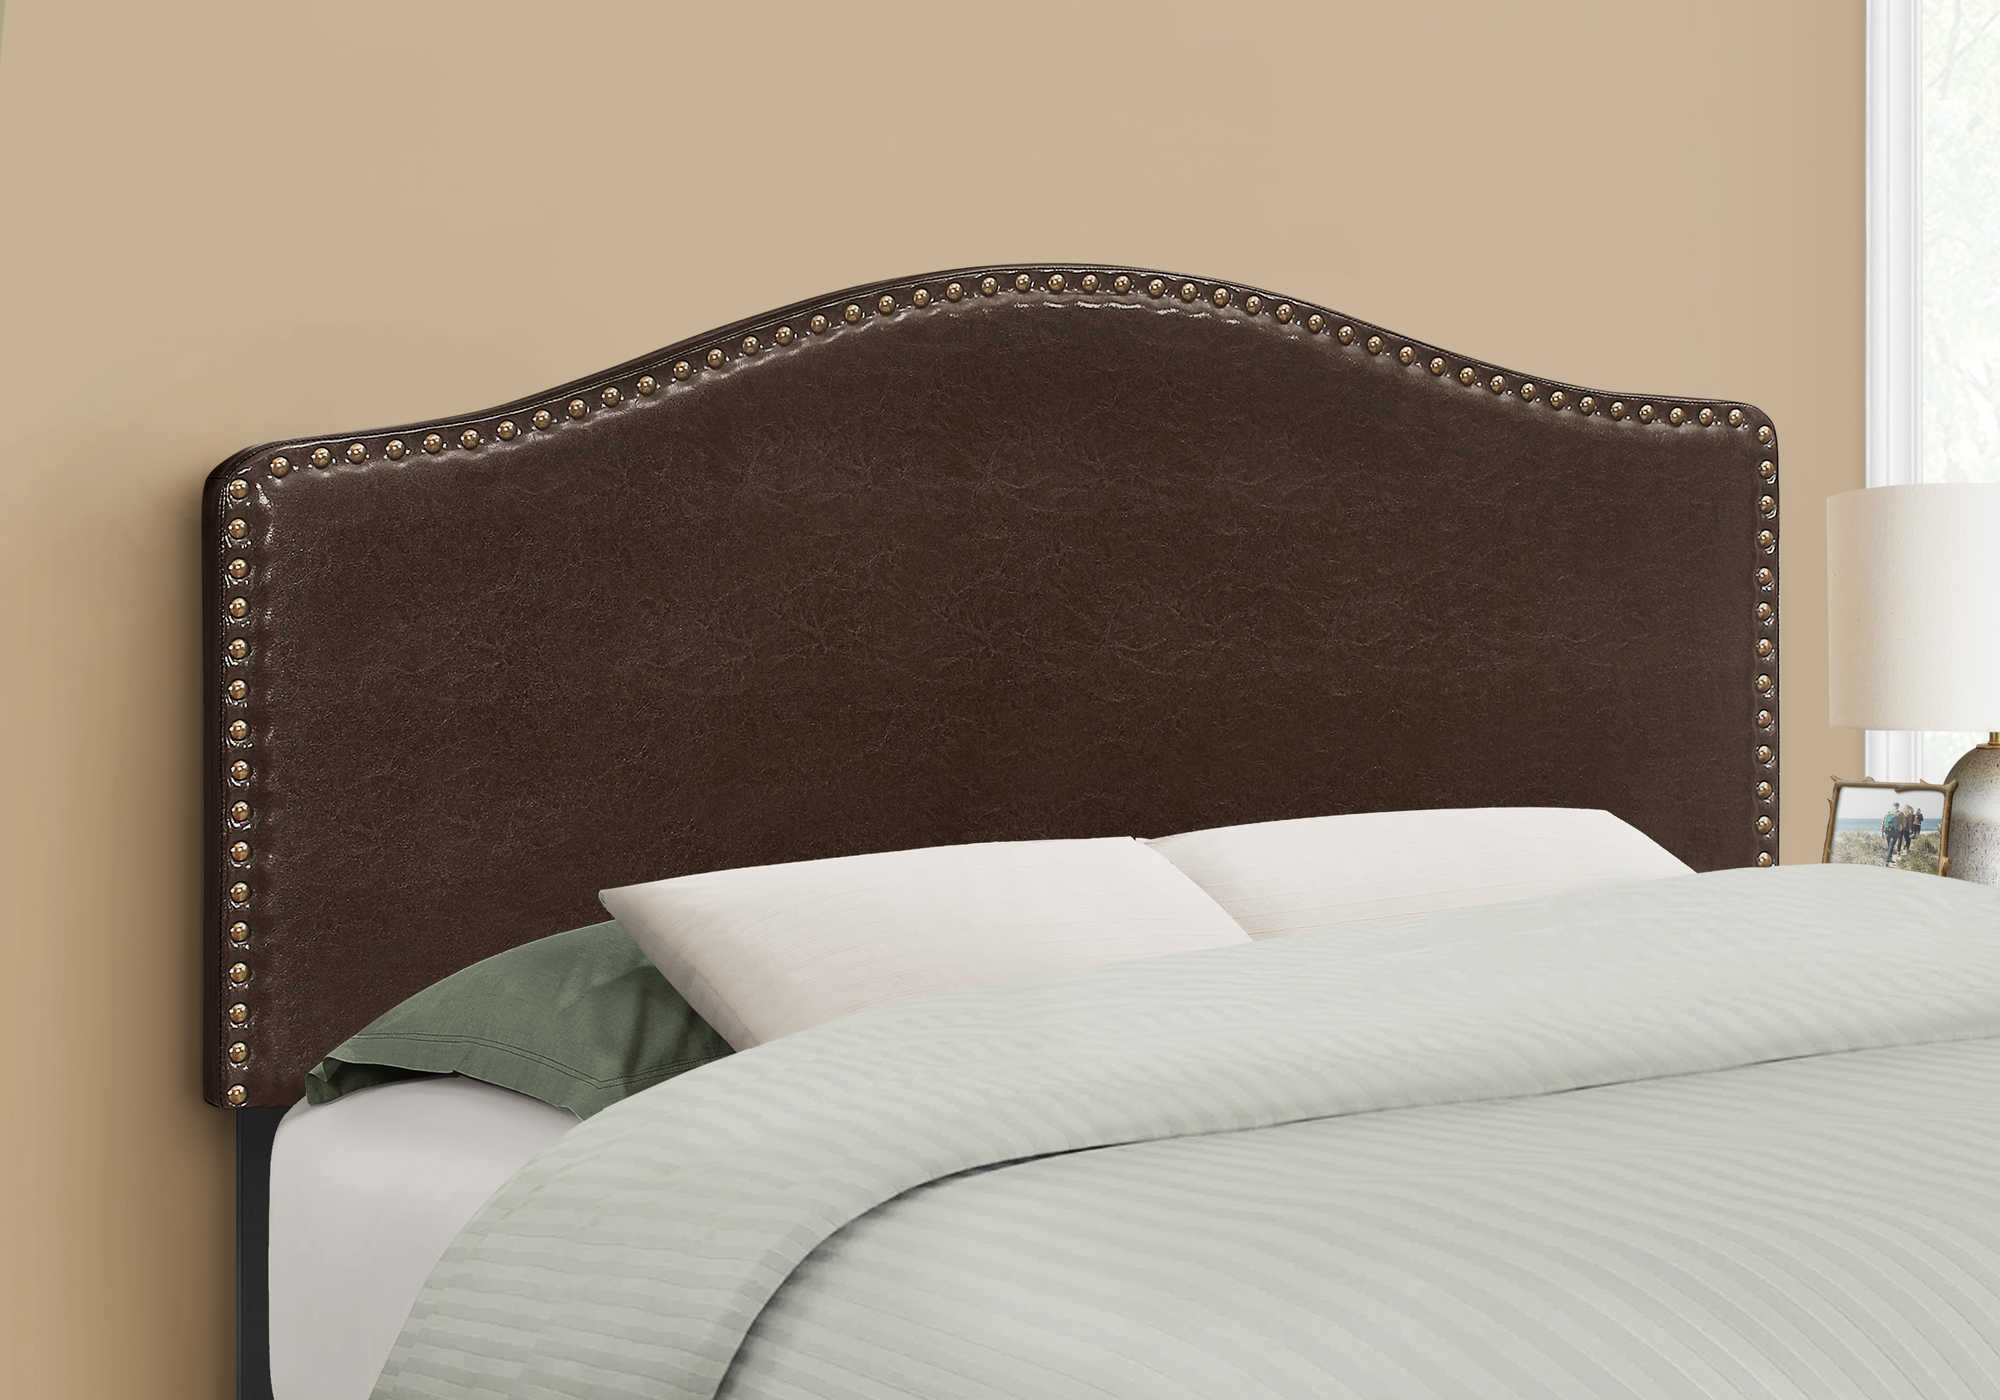 BED - FULL SIZE / BROWN LEATHER-LOOK HEADBOARD ONLY